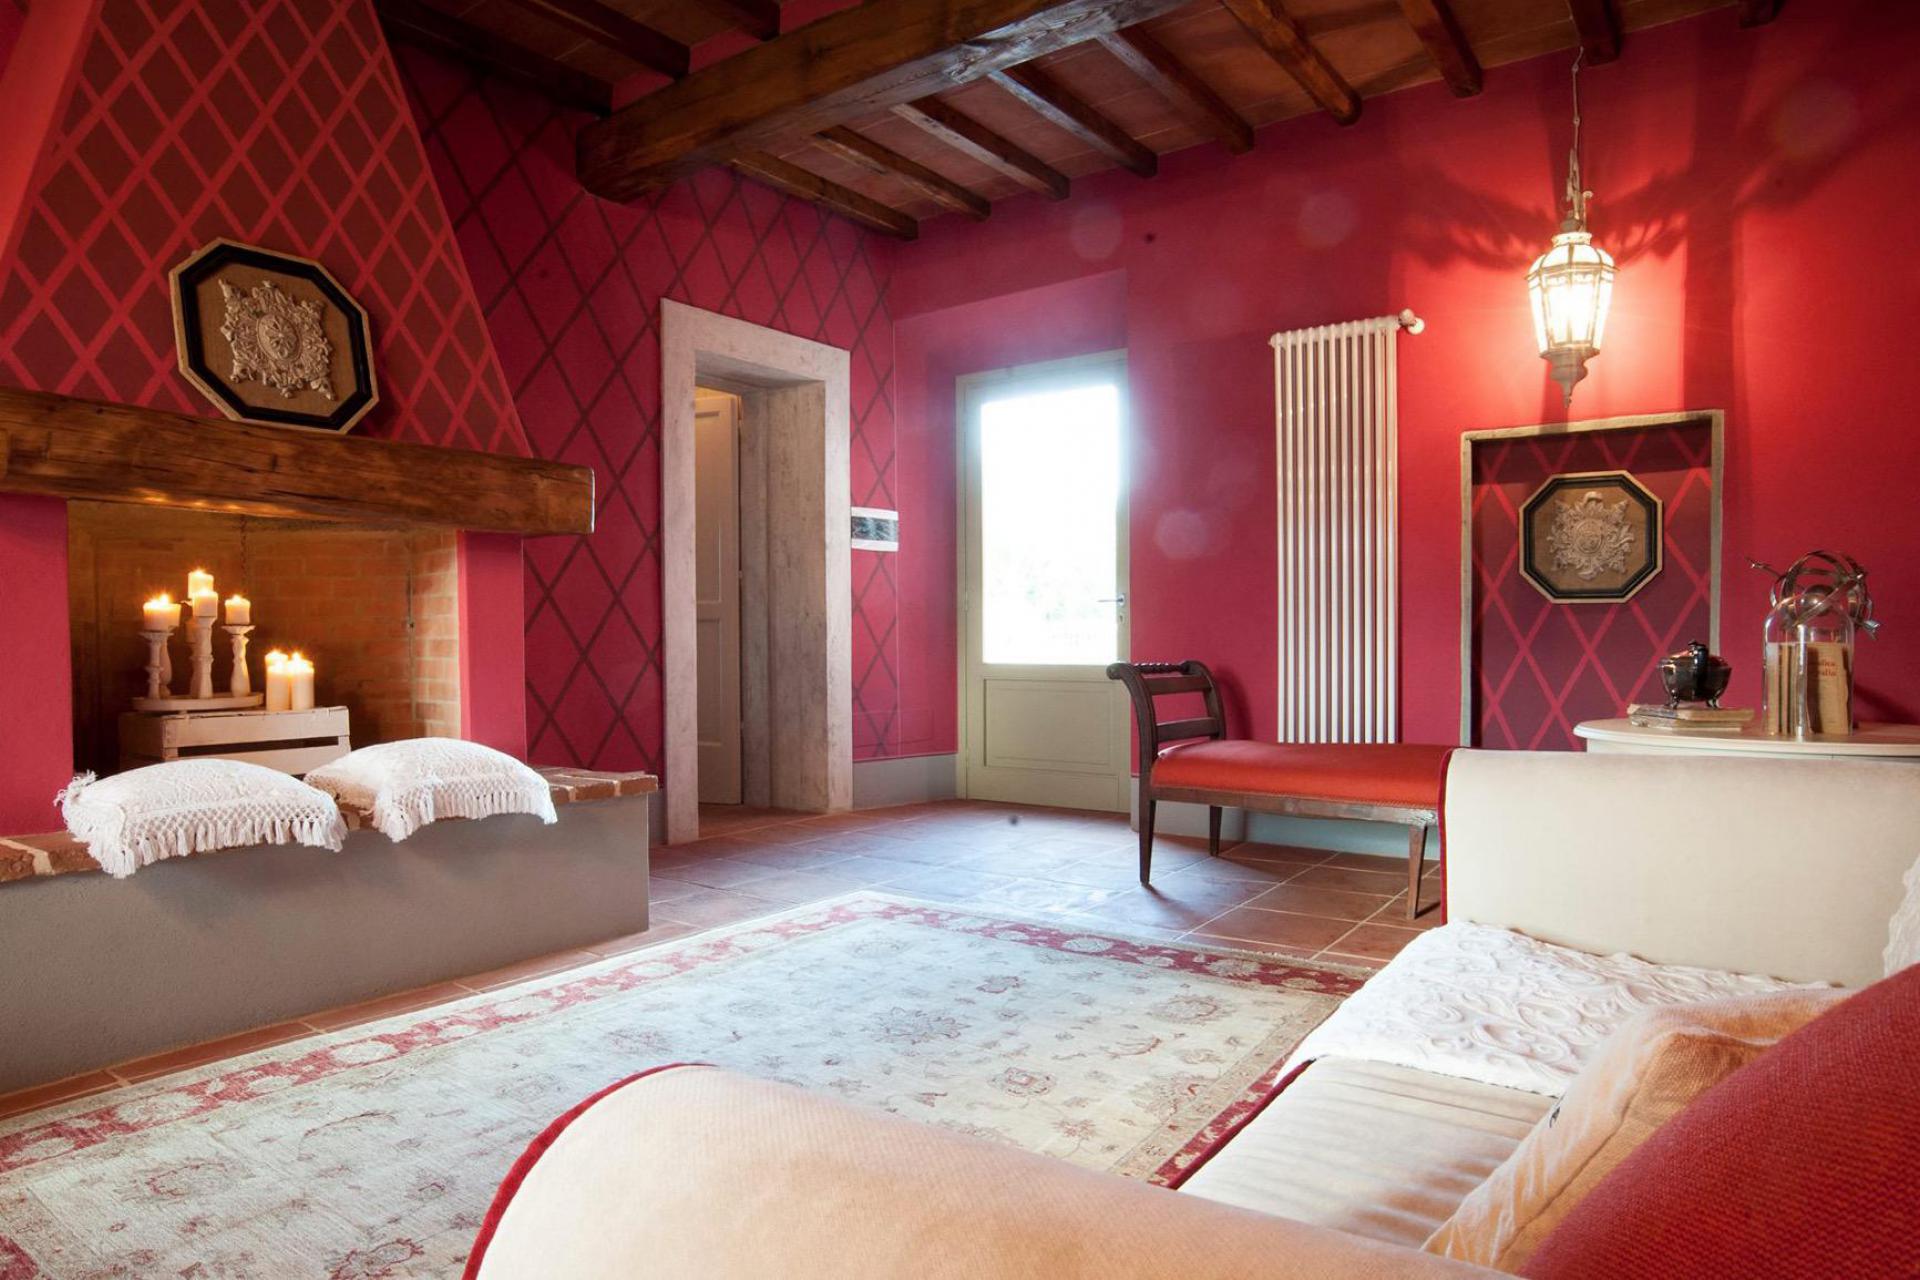 Agriturismo Tuscany Agriturismo in Tuscany with design interiors